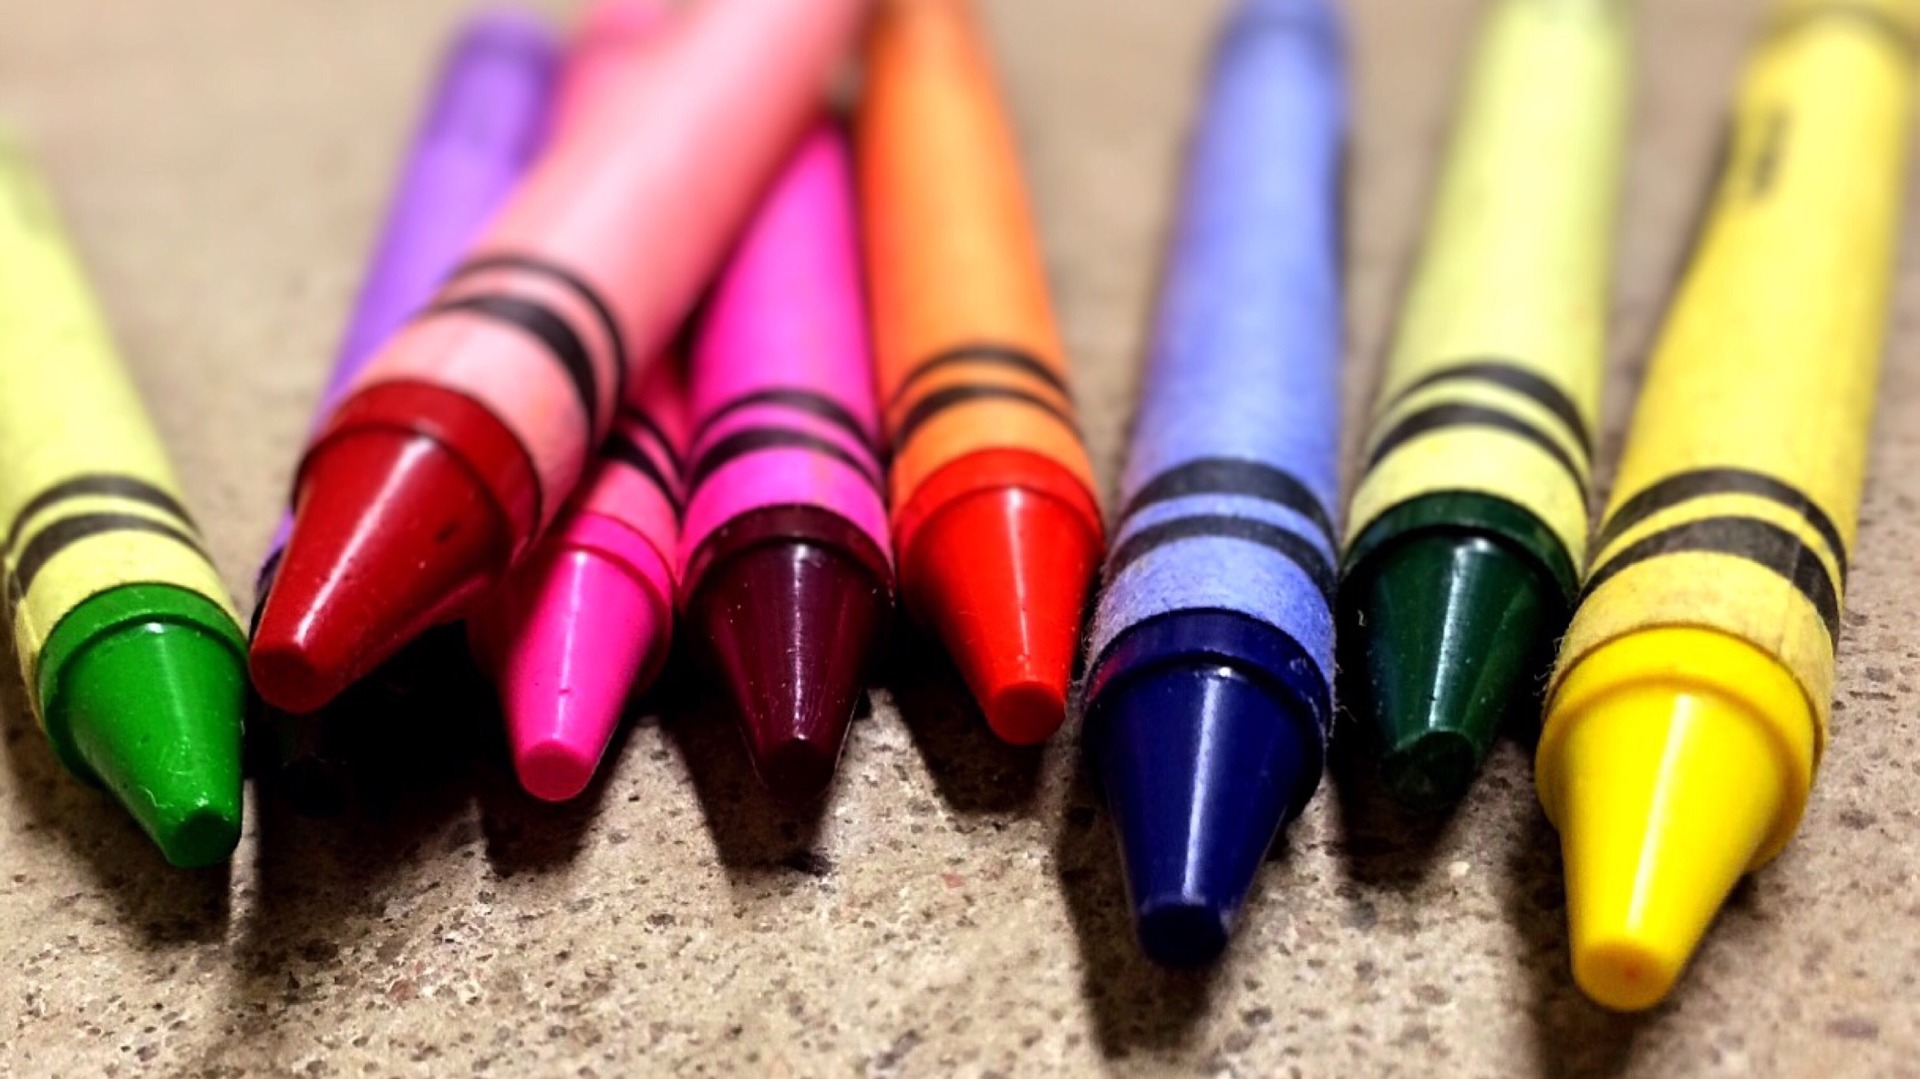 64 Shades of Wine: The Crayola Experiment – Laura Uncorked